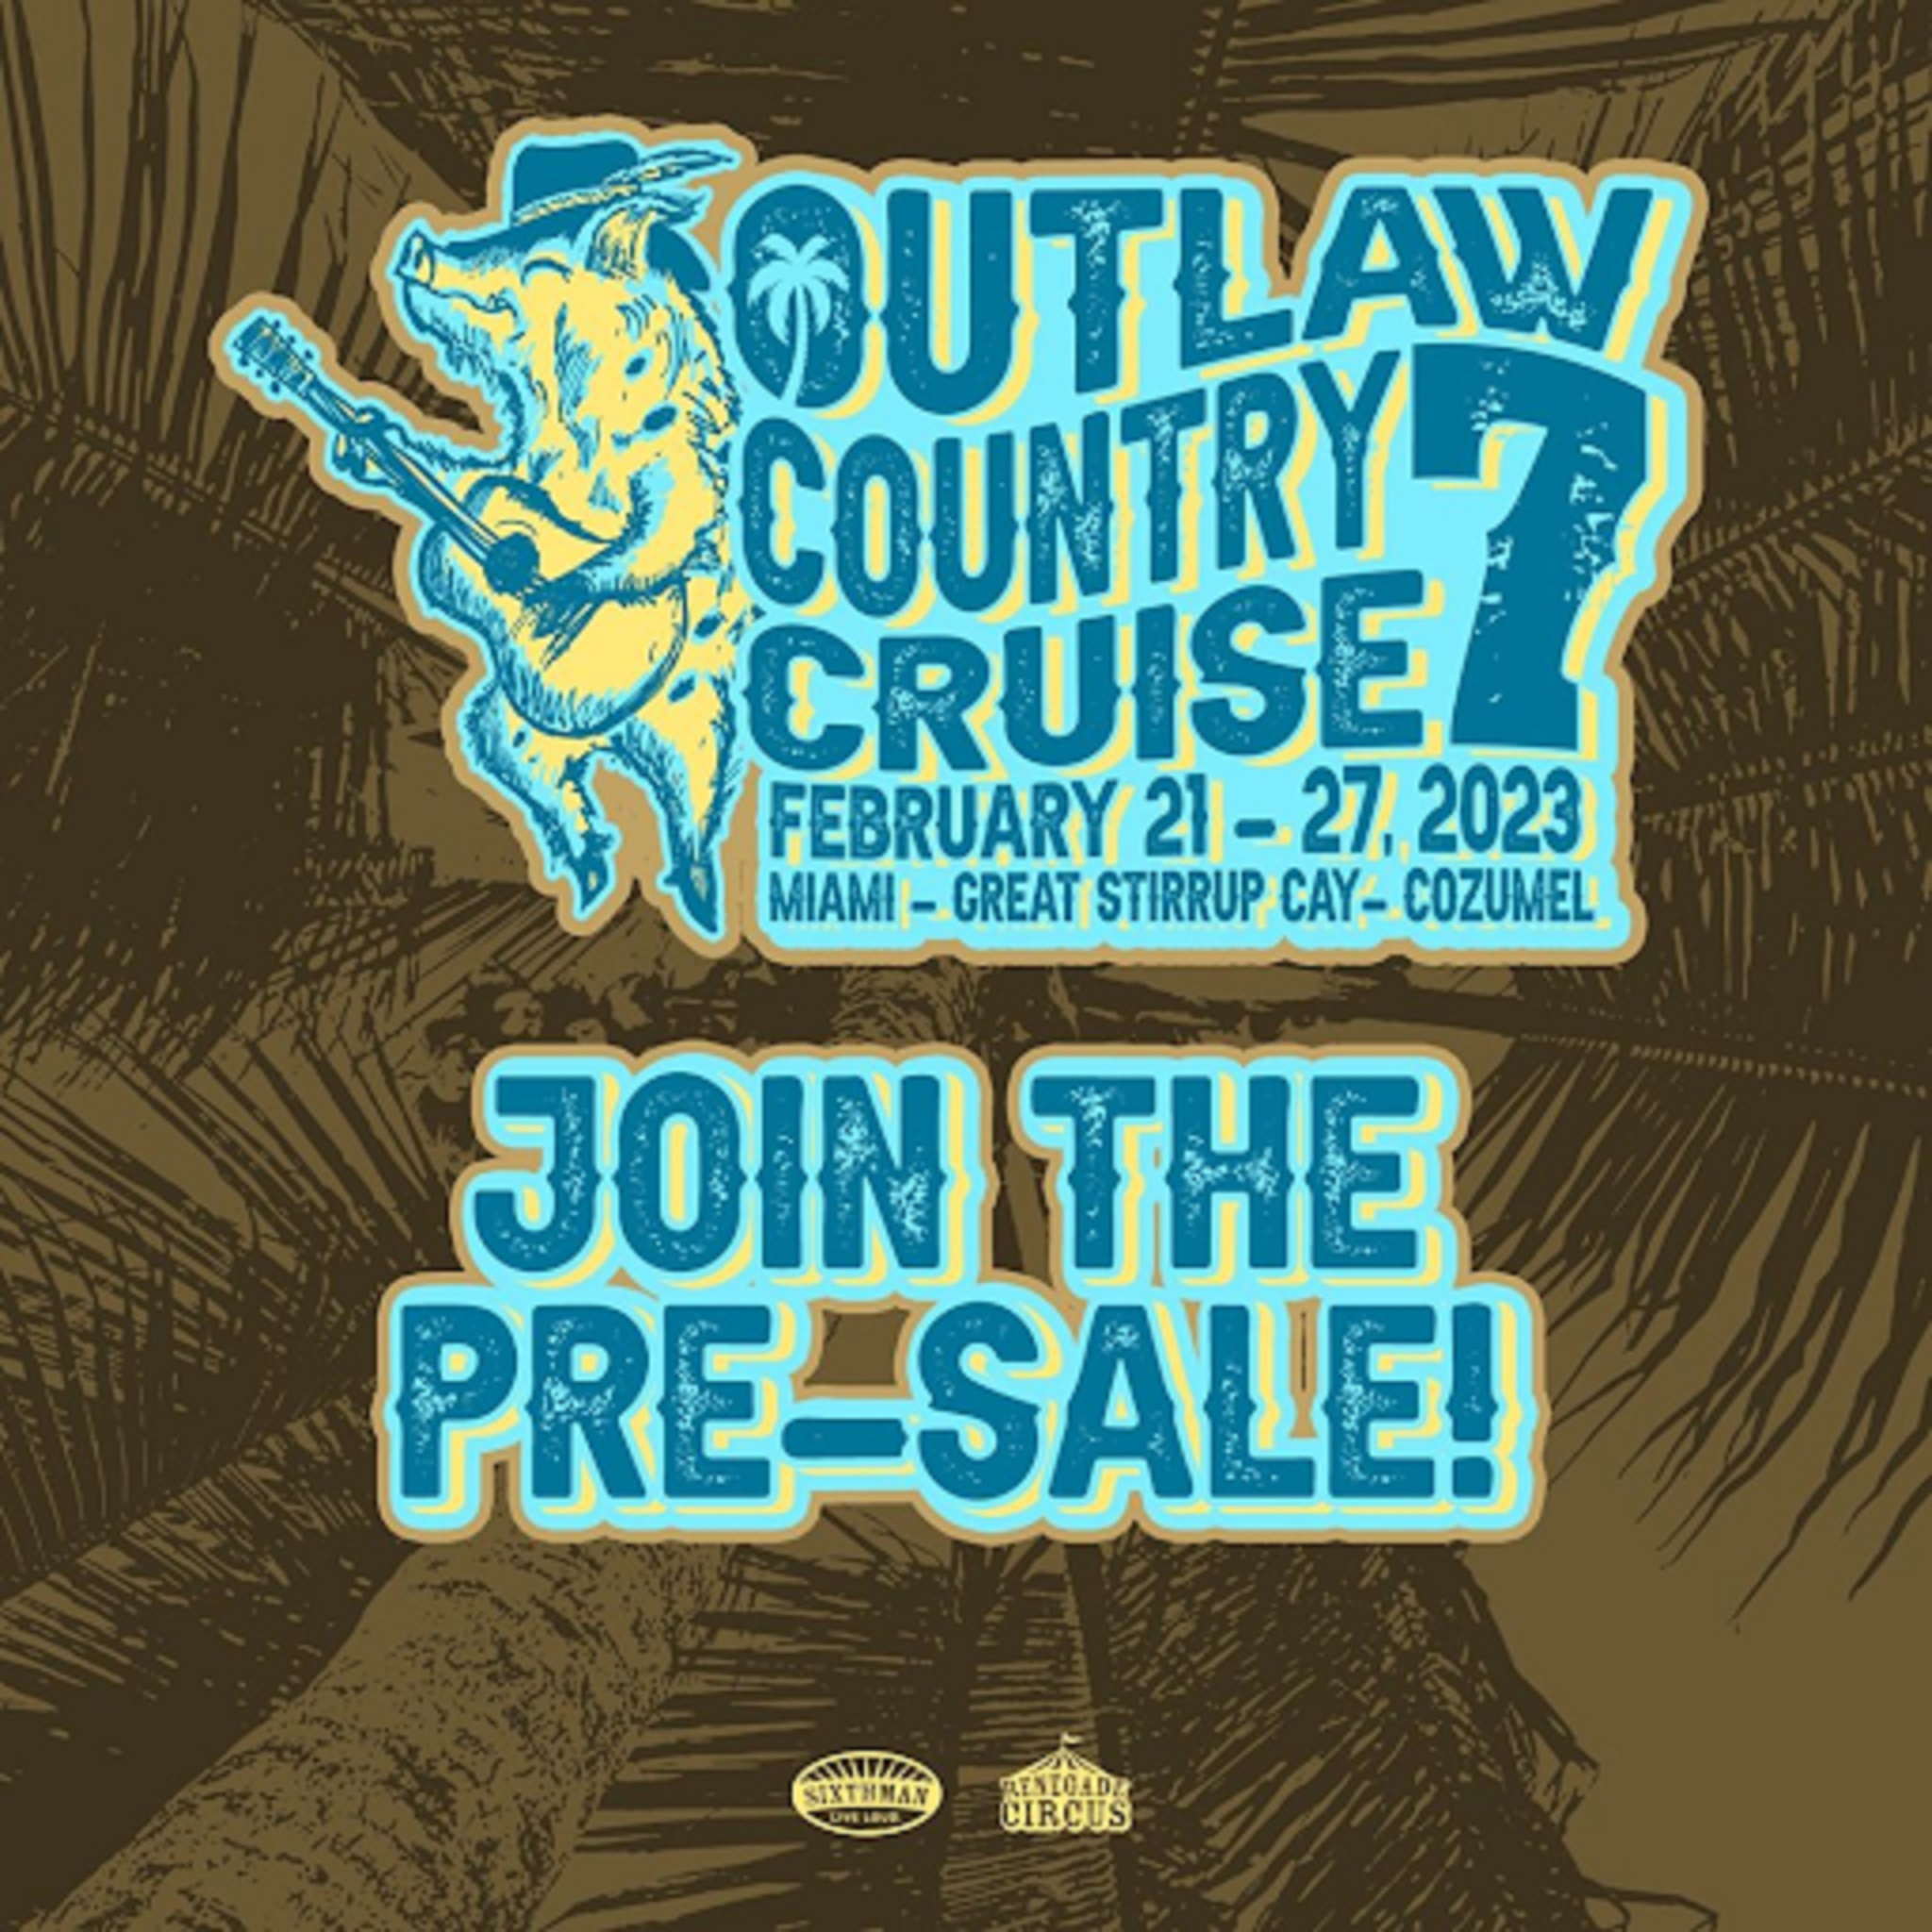 Stevie Van Zandt and Sixthman unveil Outlaw Country Cruise 7